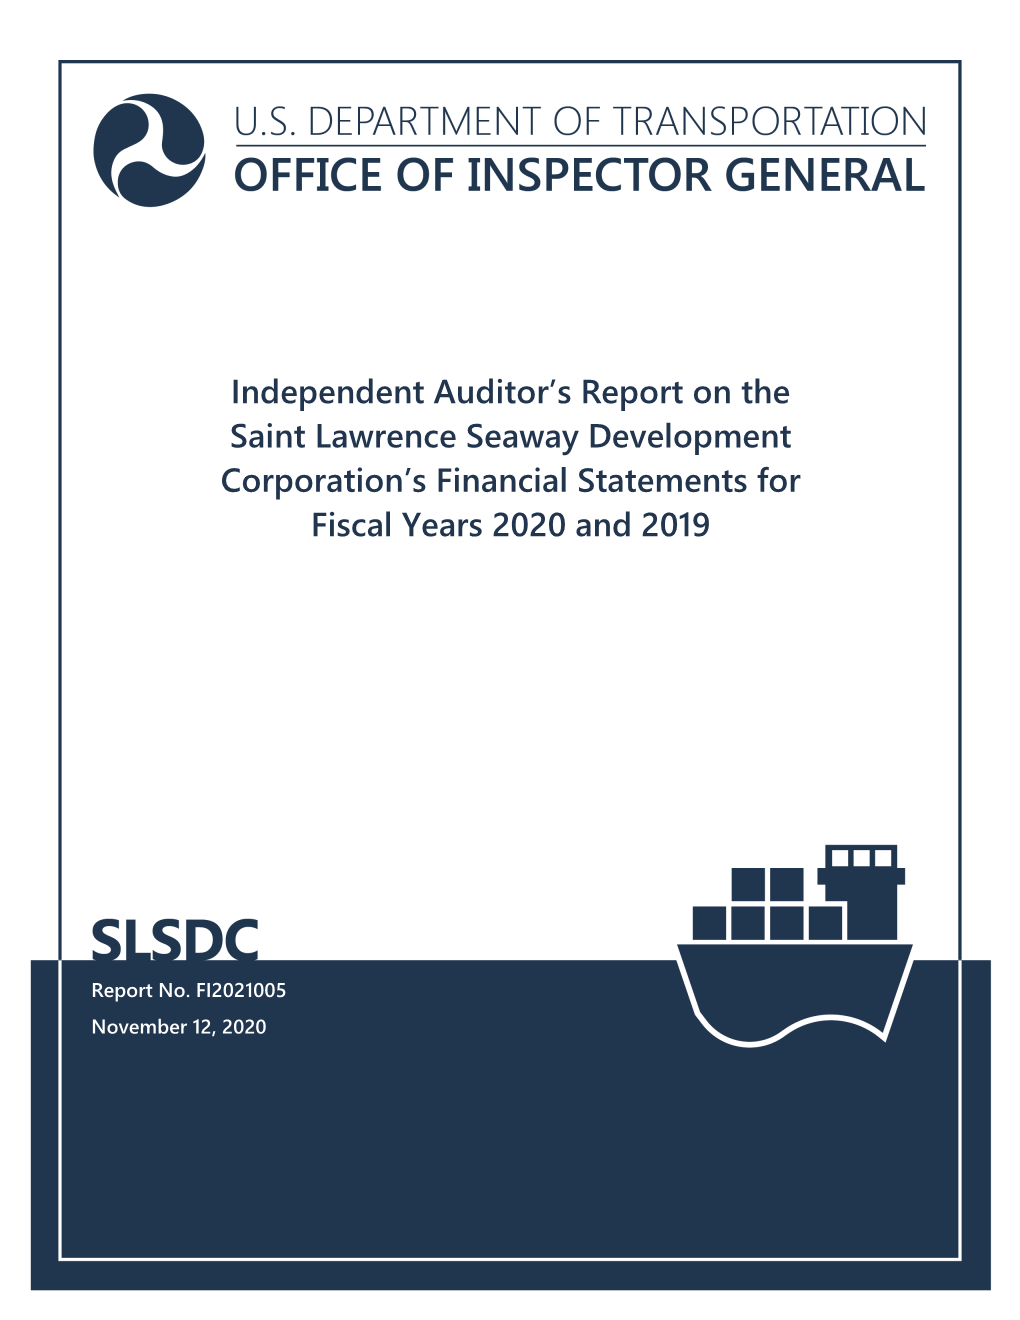 Independent Auditors' Report on the Saint Lawrence Seaway Development Corporation's Financial Statements for Fiscal Years 20